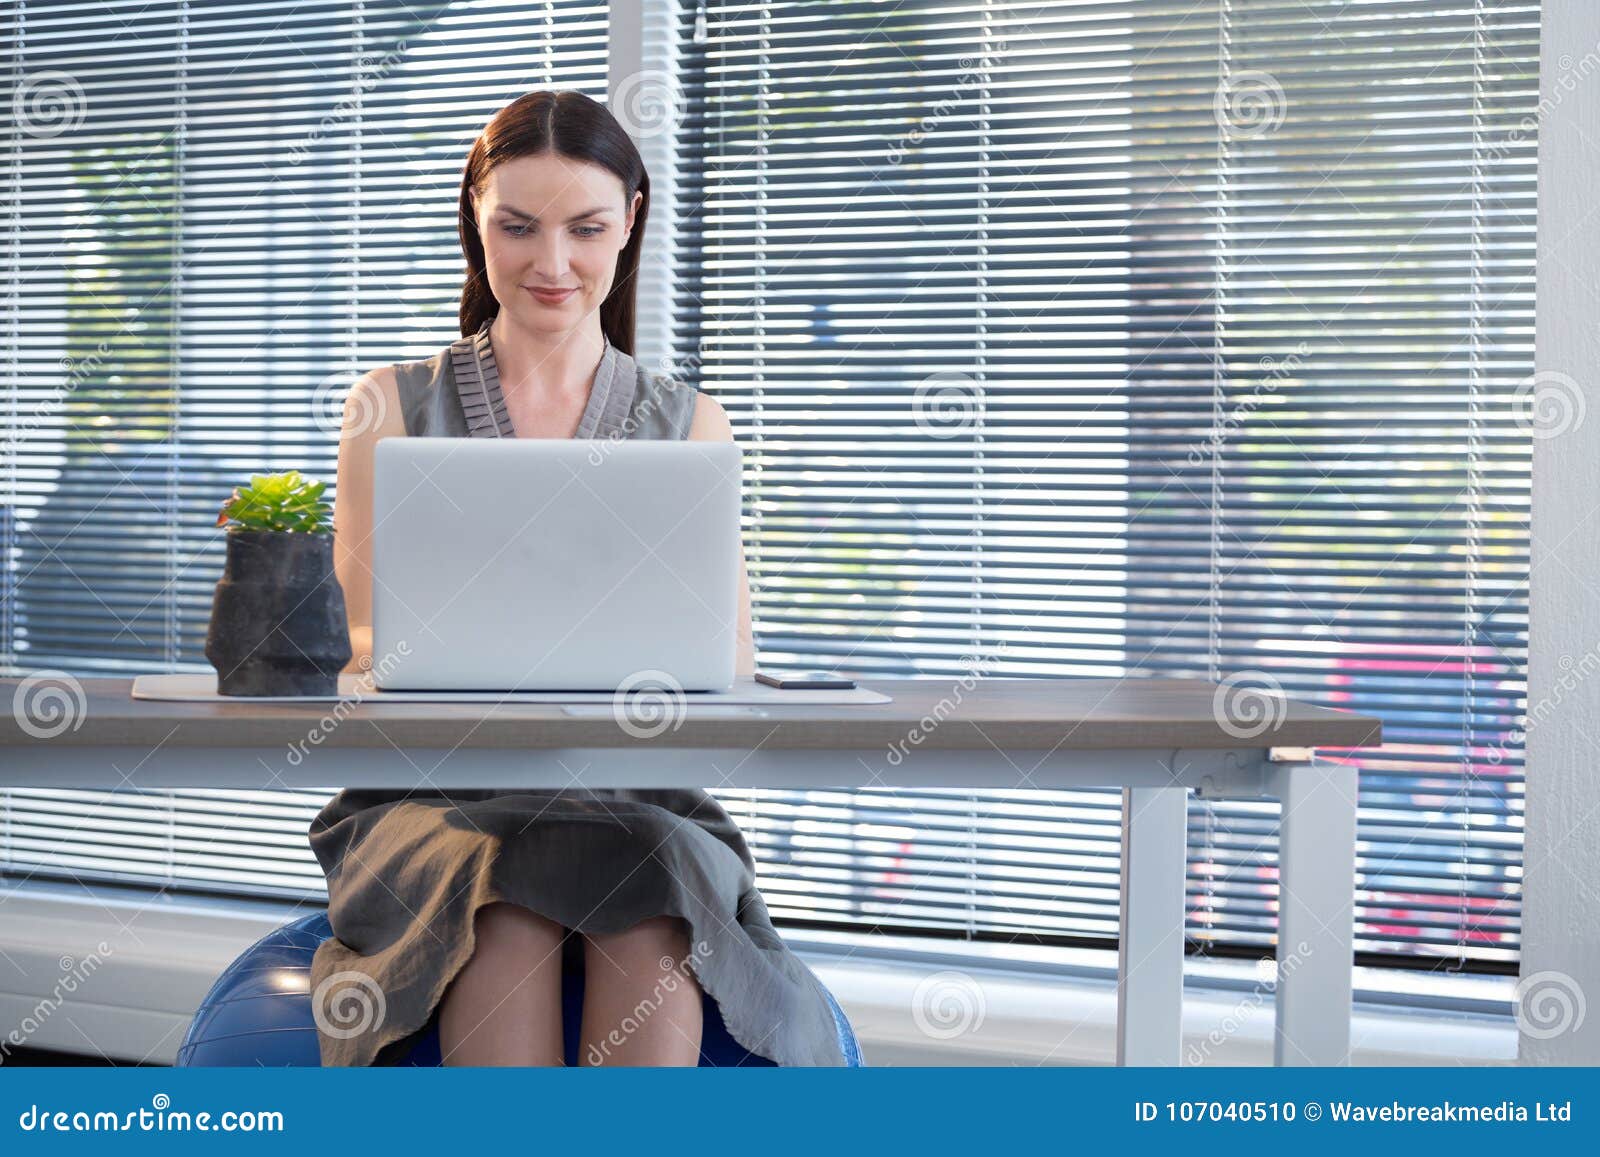 Female Executive Sitting On Exercise Ball While Working At Desk